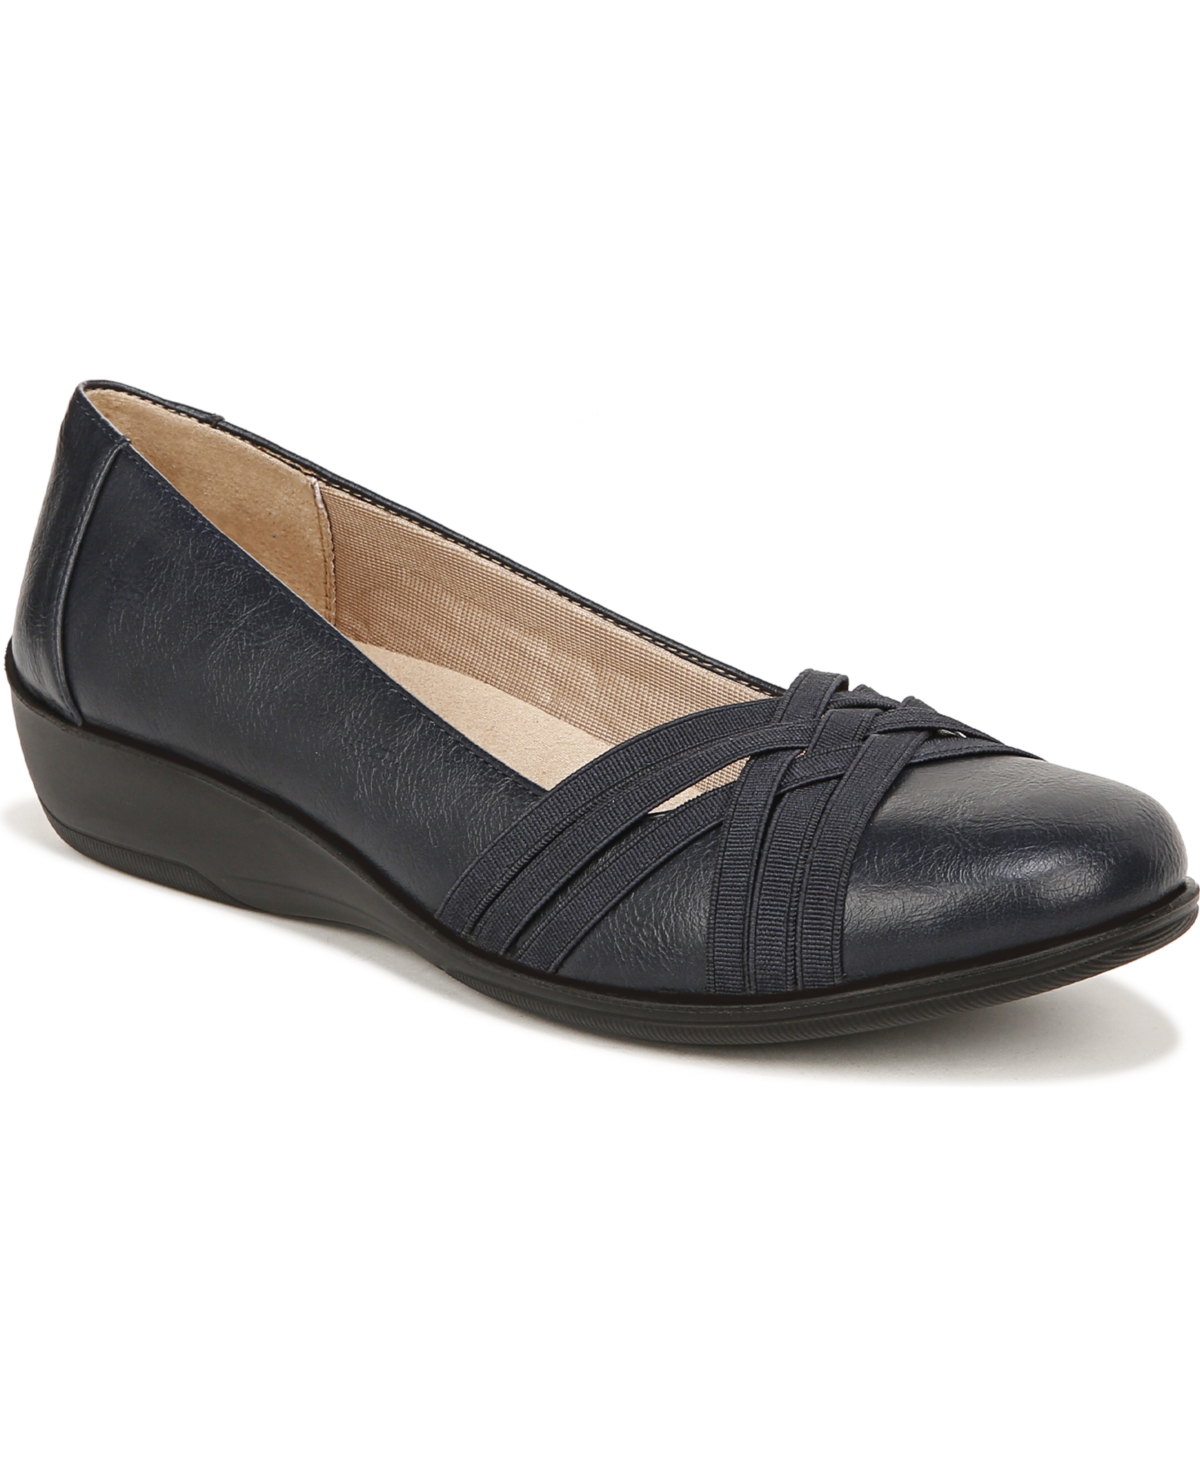 Women's Incredible 2 Slip On Ballet Flats - Lux Navy Faux Leather